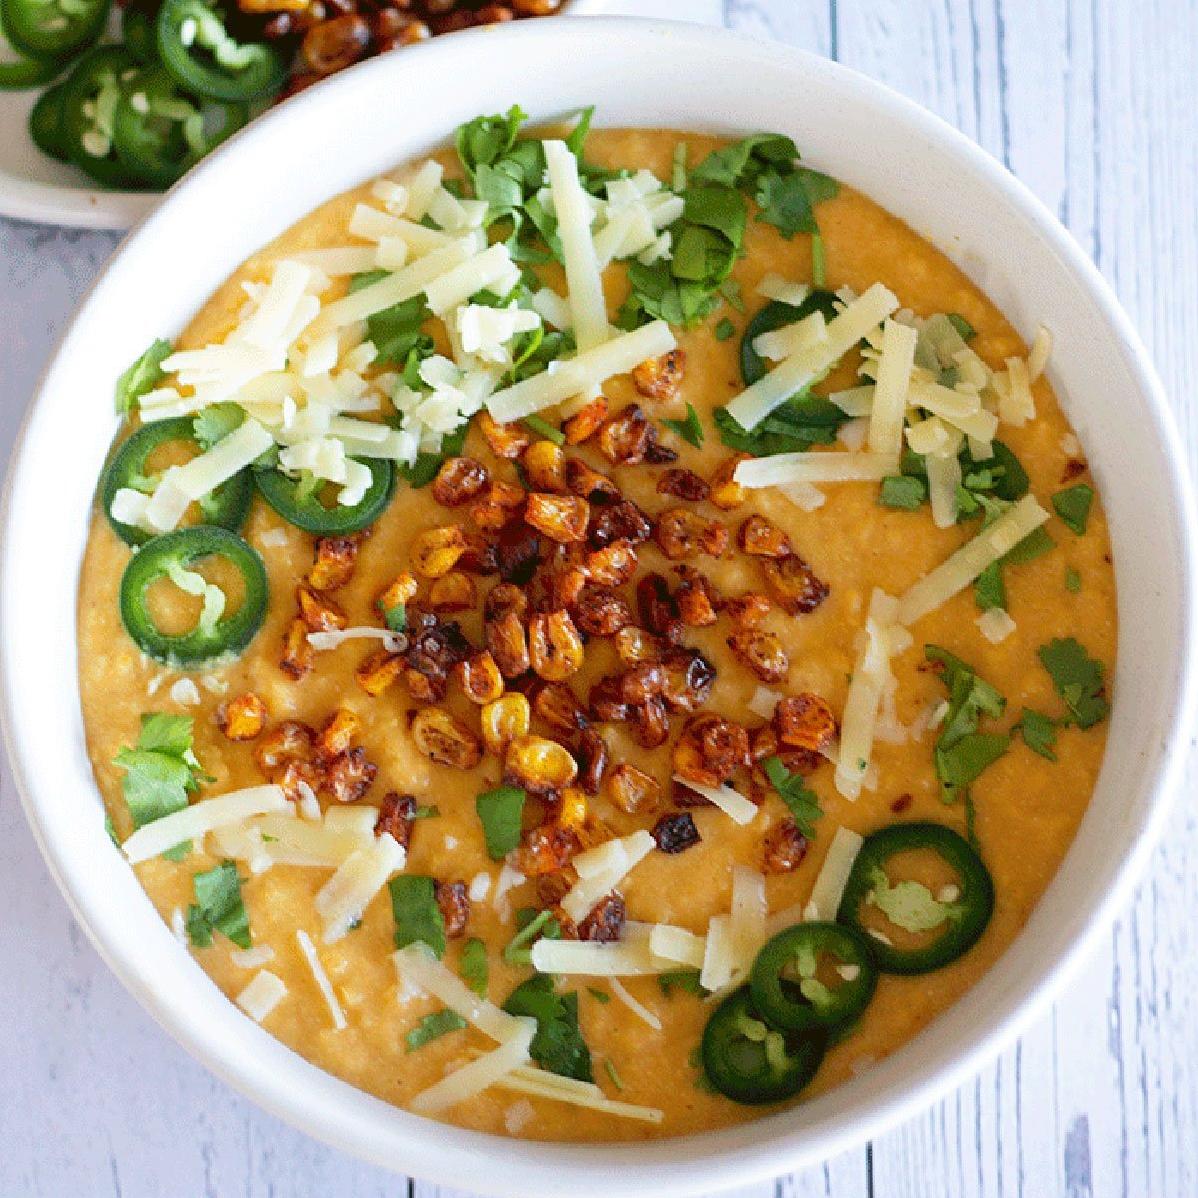  This hearty soup is perfect as a main dish or a side to your favorite Mexican entree